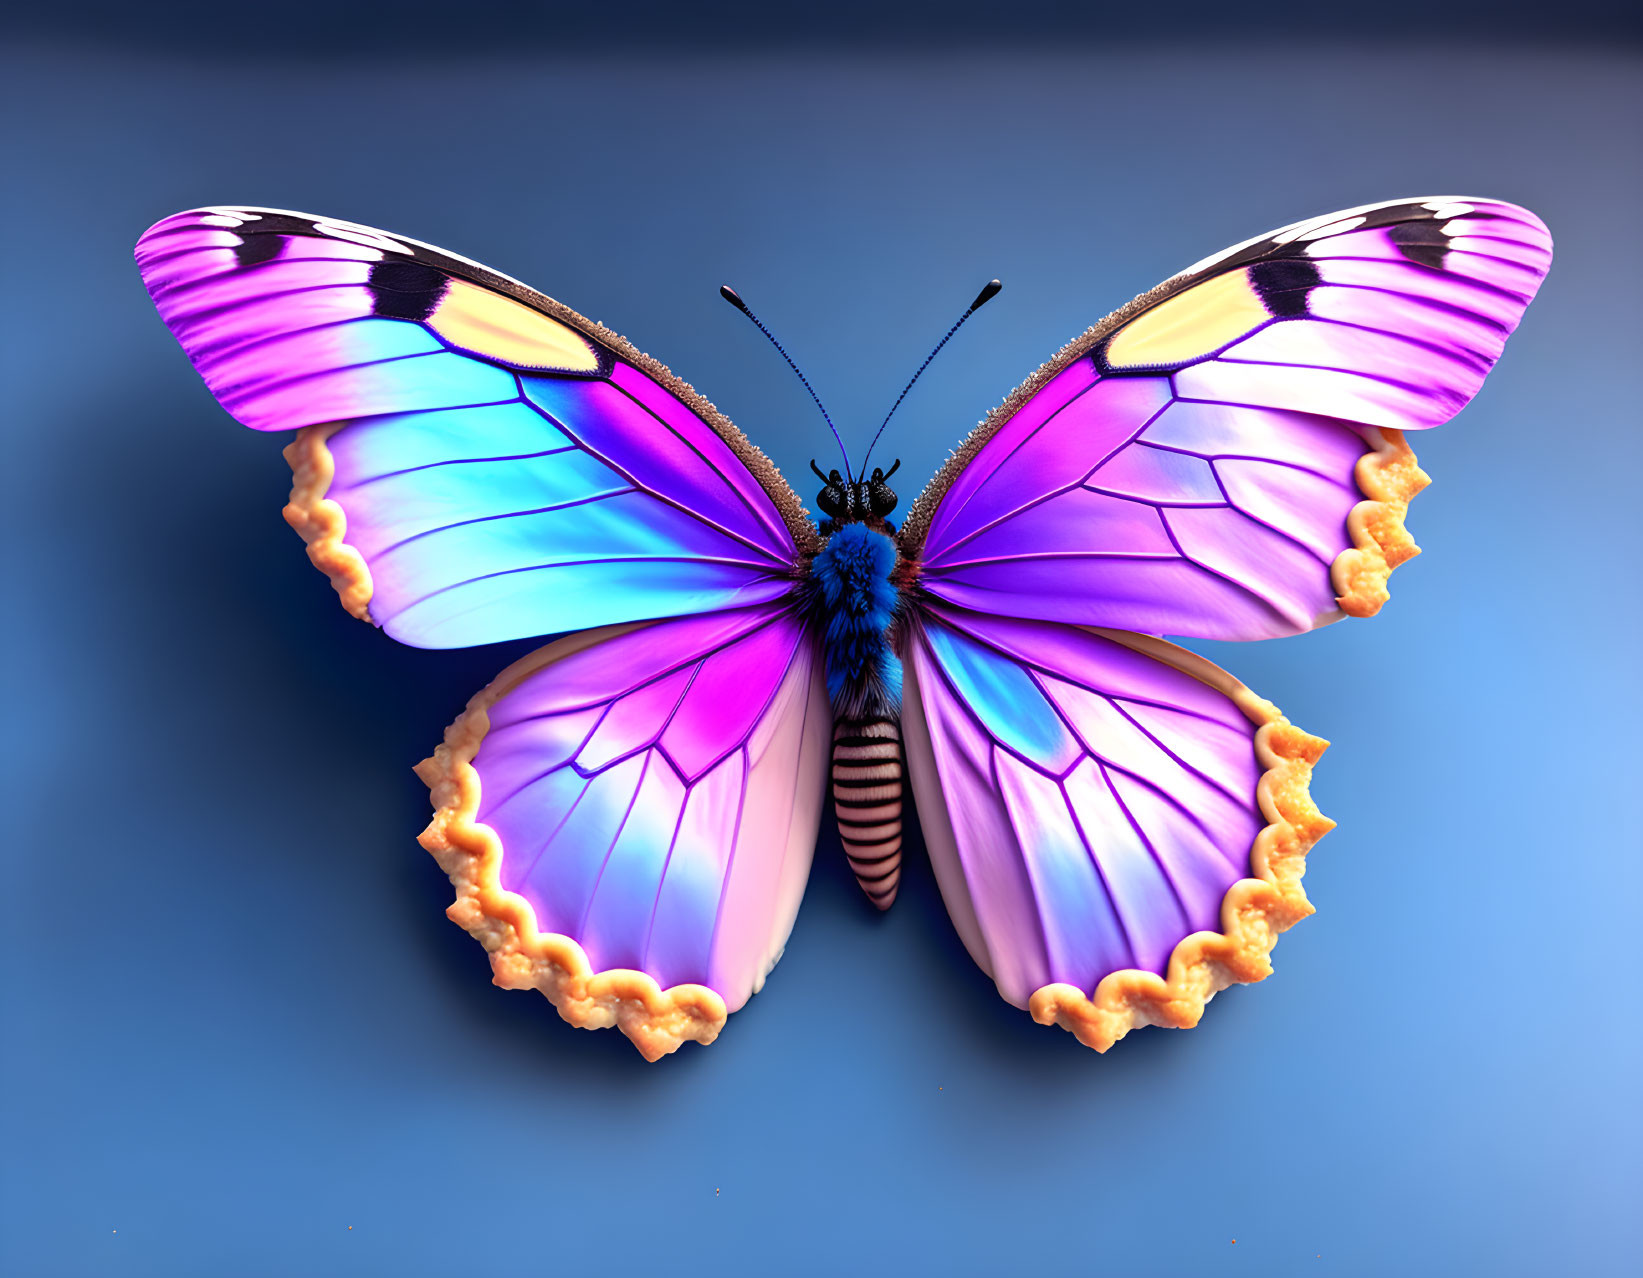 Colorful Butterfly Illustration with Purple and Blue Wings on Gradient Blue Background